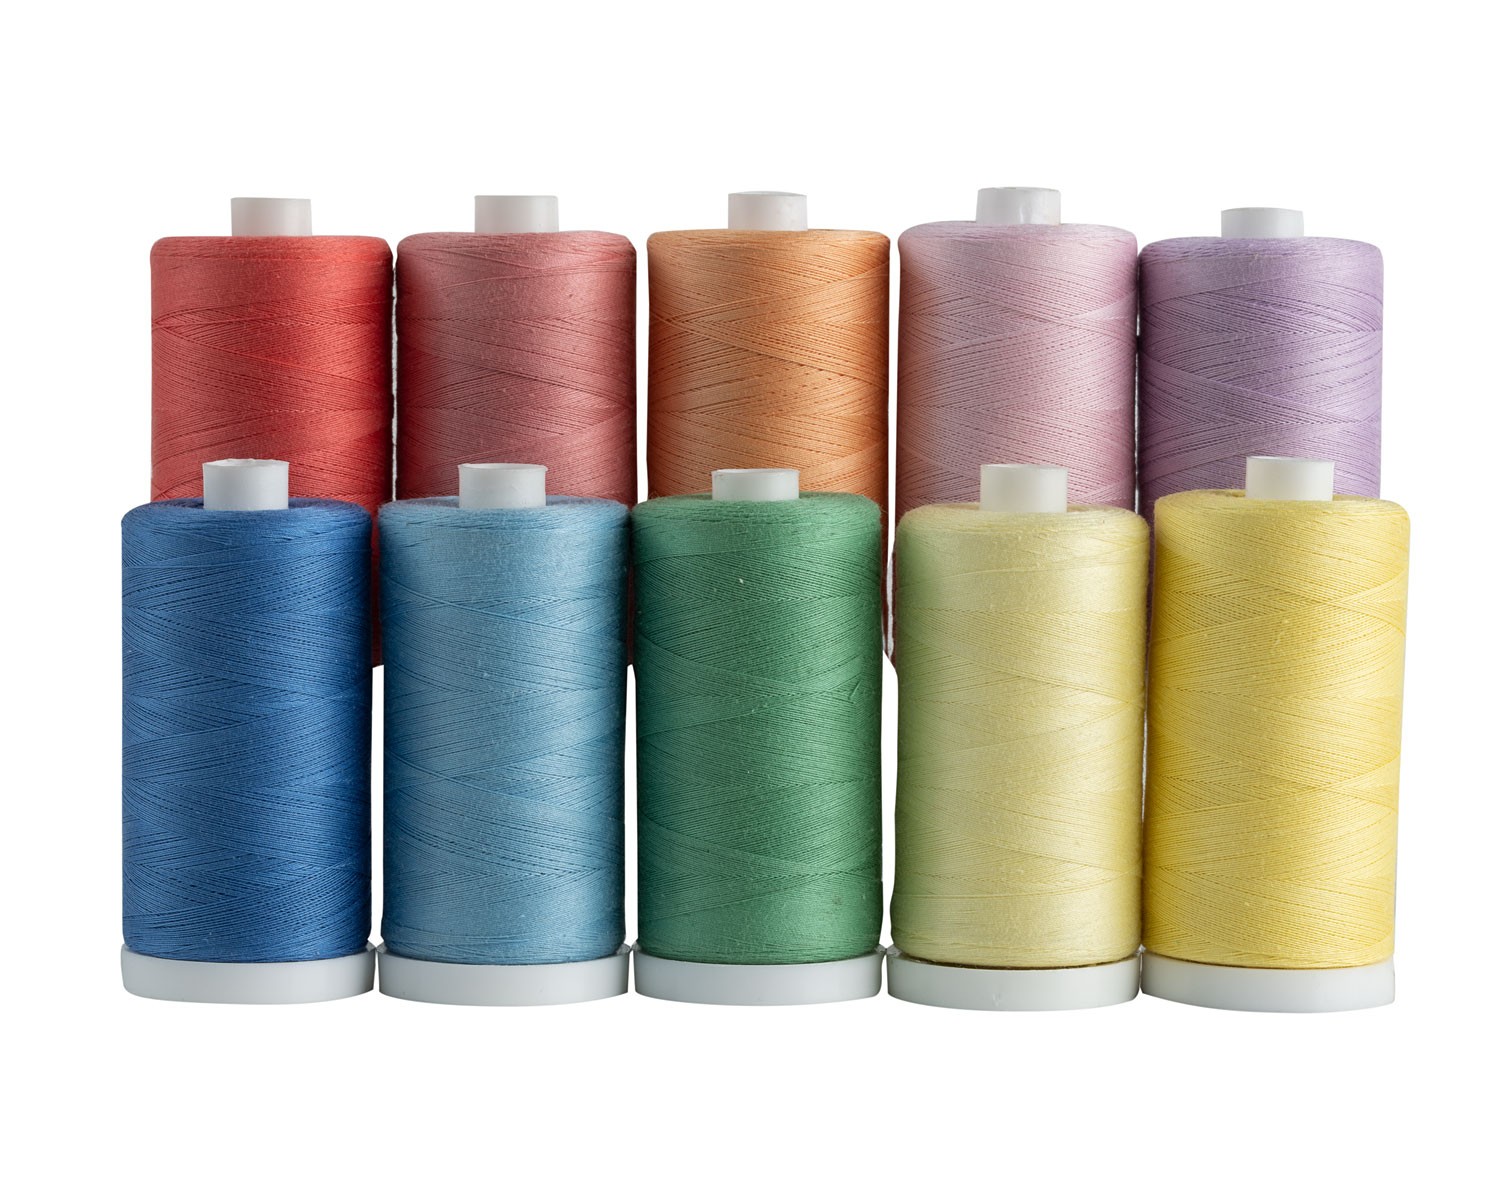 Connecting Threads 100% Cotton Thread Sets - 1200 Yard Spools (Set of 10 -  Porcelain China)